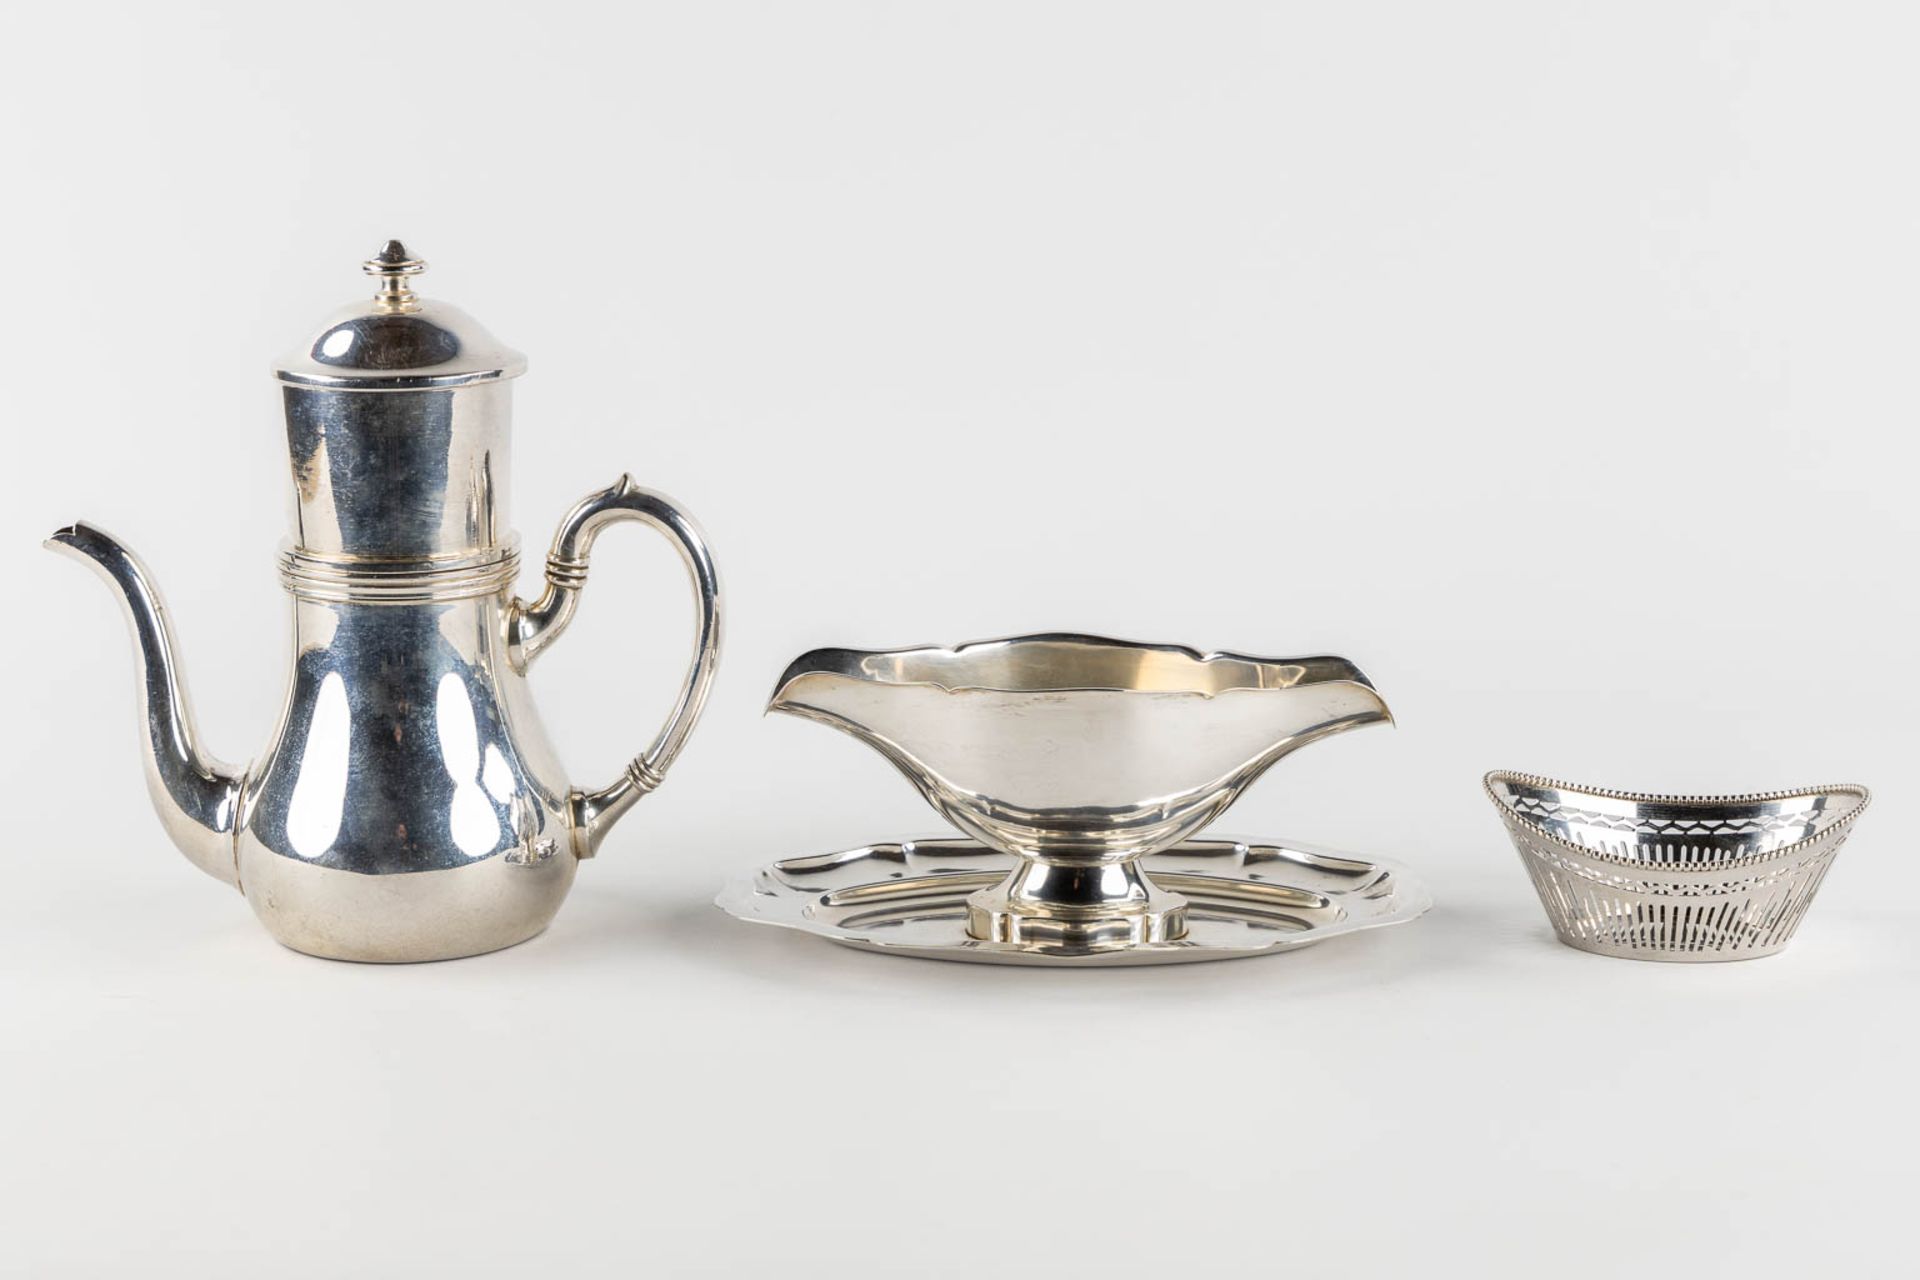 A collection of silver-plated serving accessories, saucer, coffee pot and a basket. (L:32 x W:52 cm) - Image 9 of 14